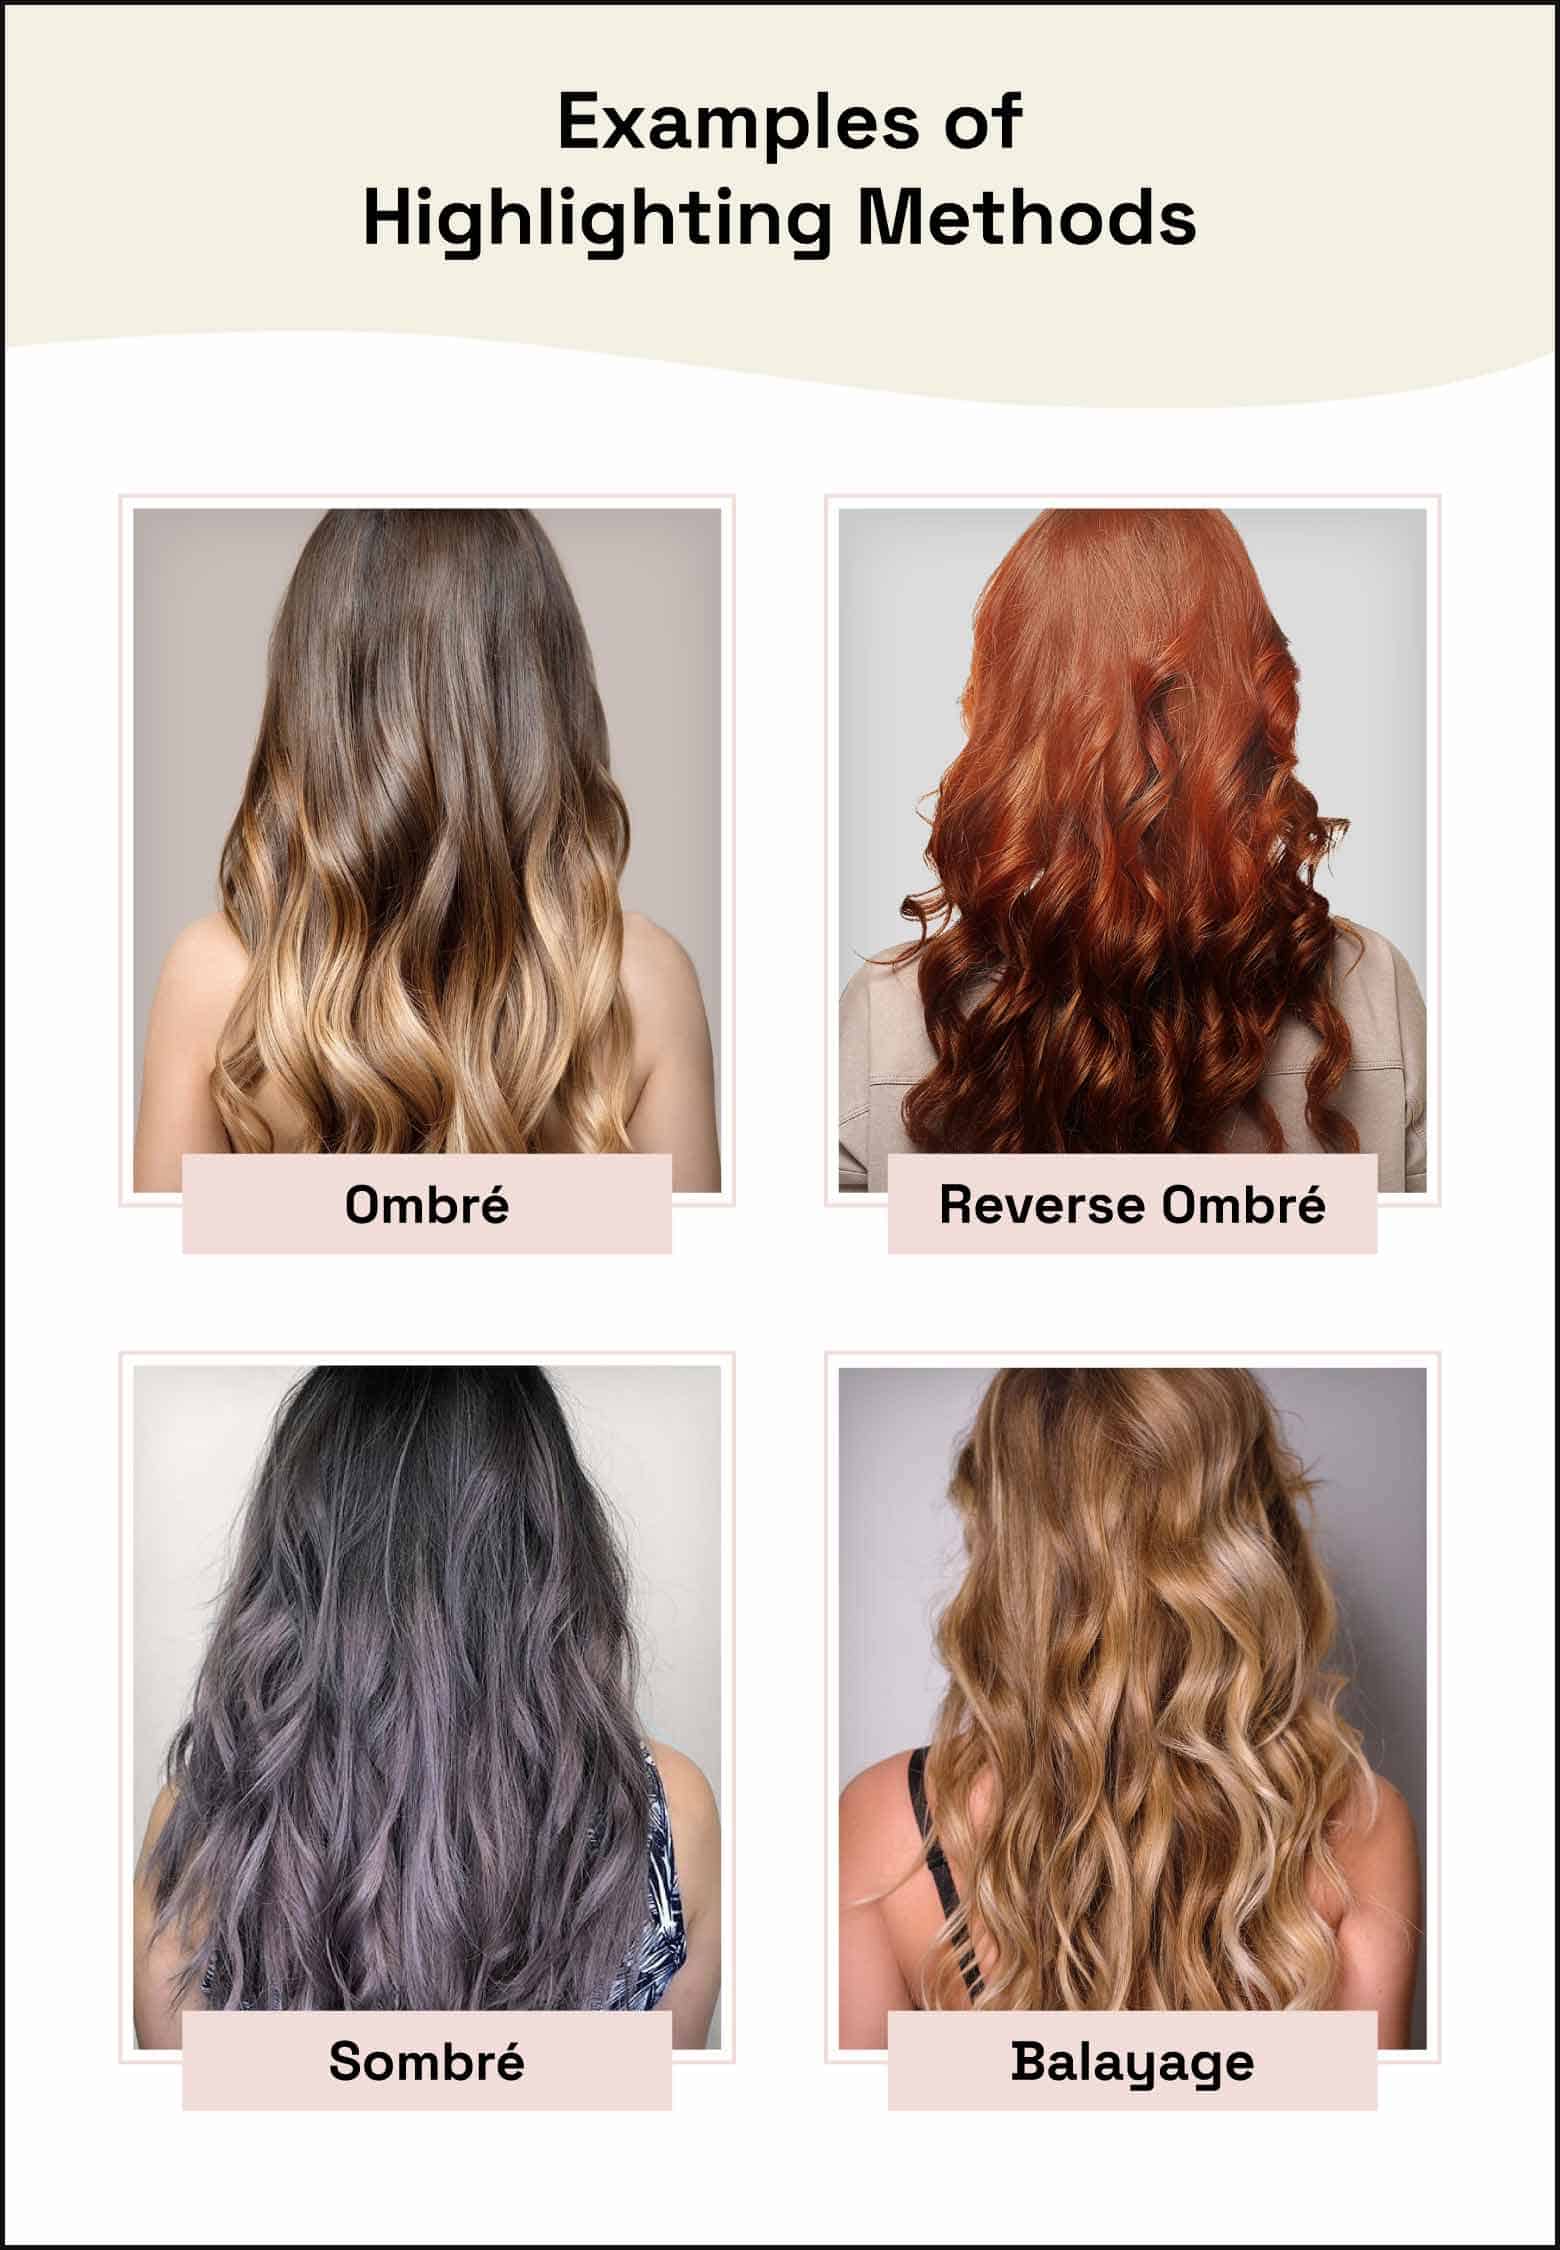 photo examples of ombre, reverse ombre, sombre, balayage